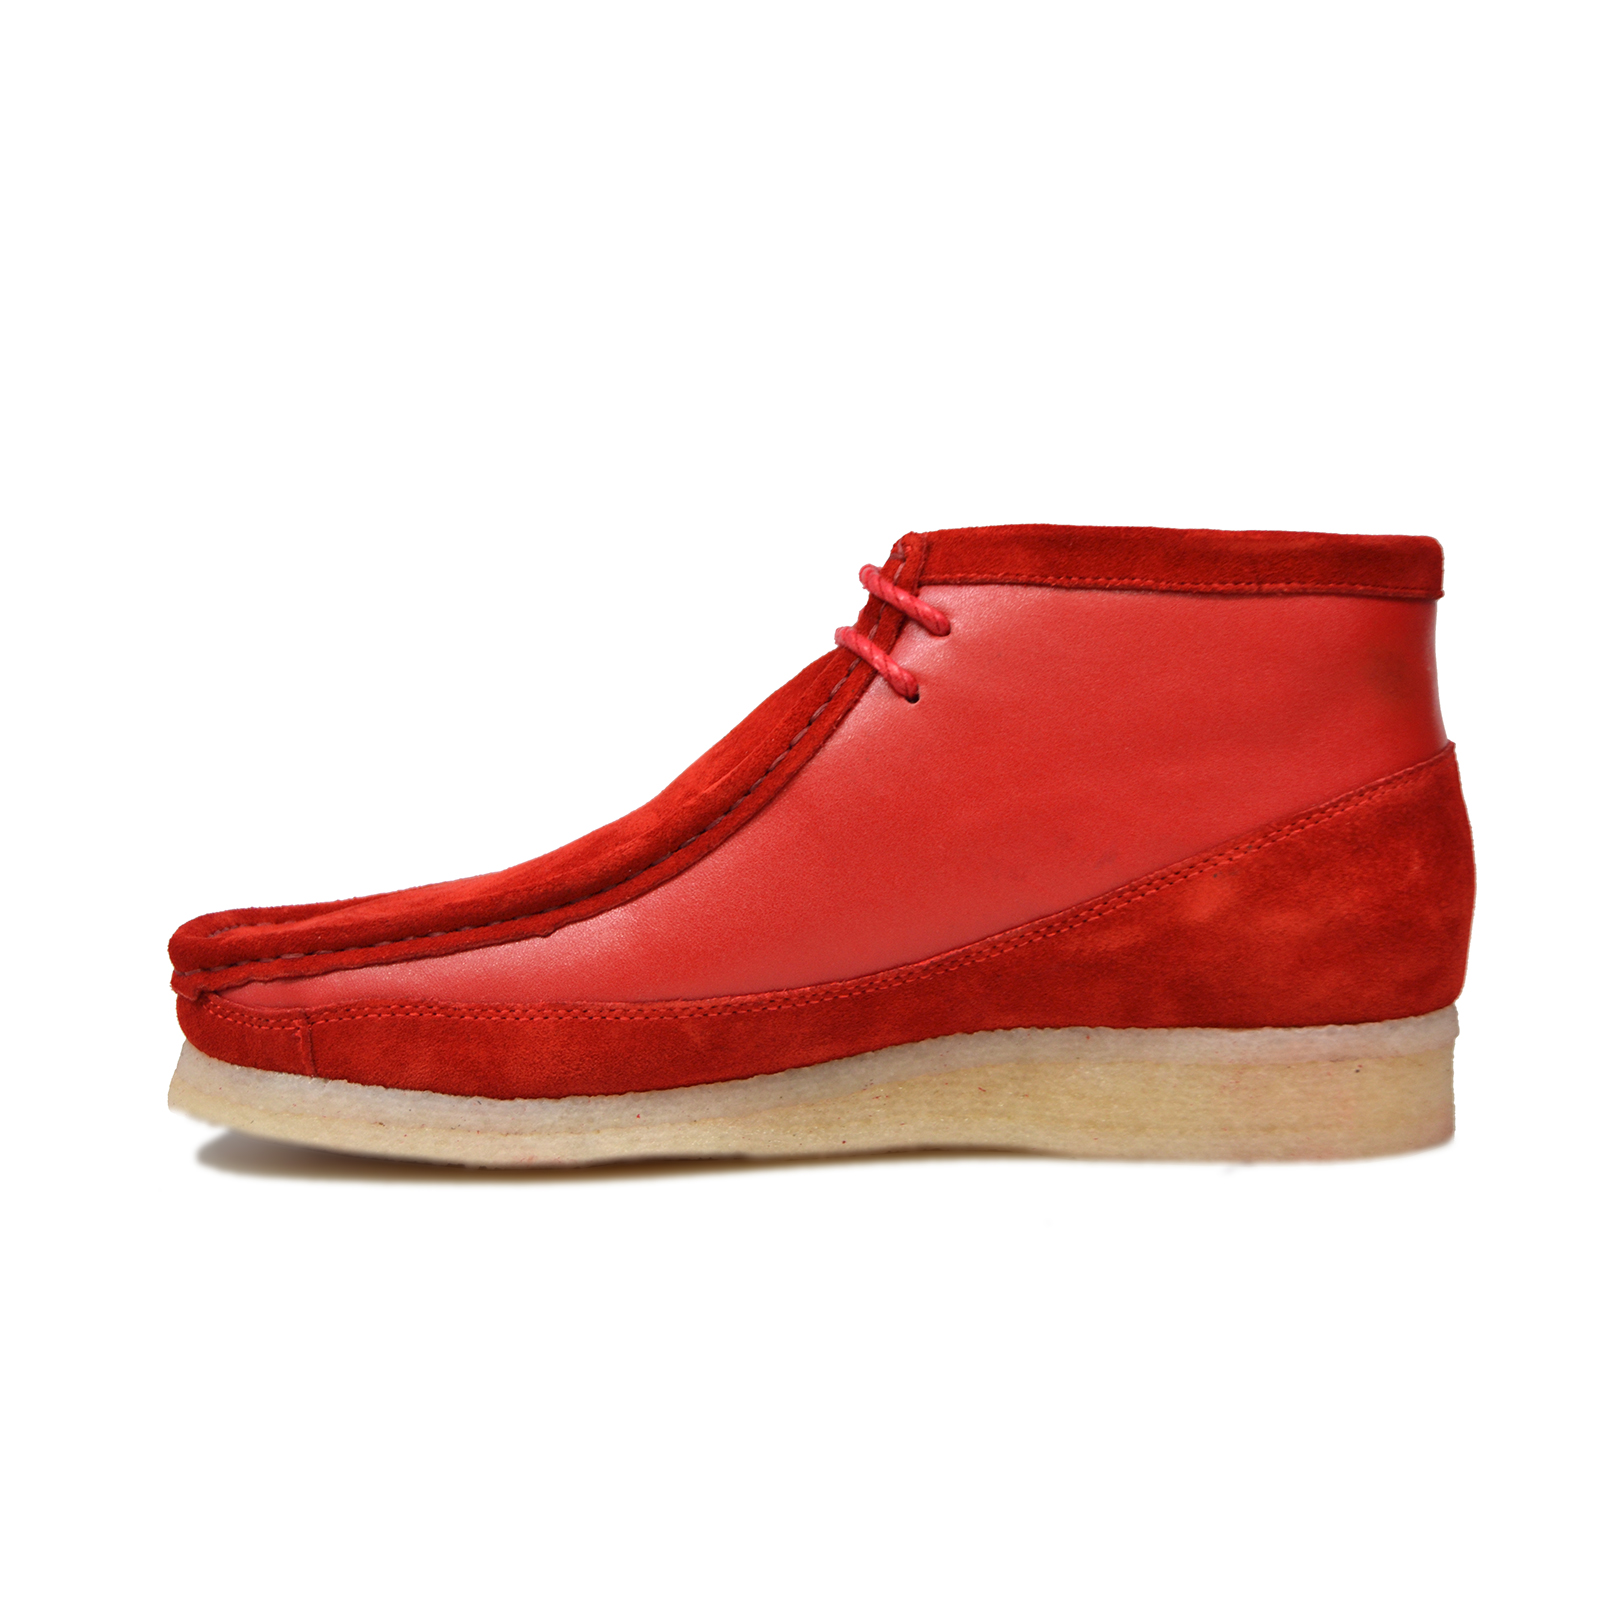 British Collection Walkers-Red Leather and Suede [100100-07] - $170.00 ...